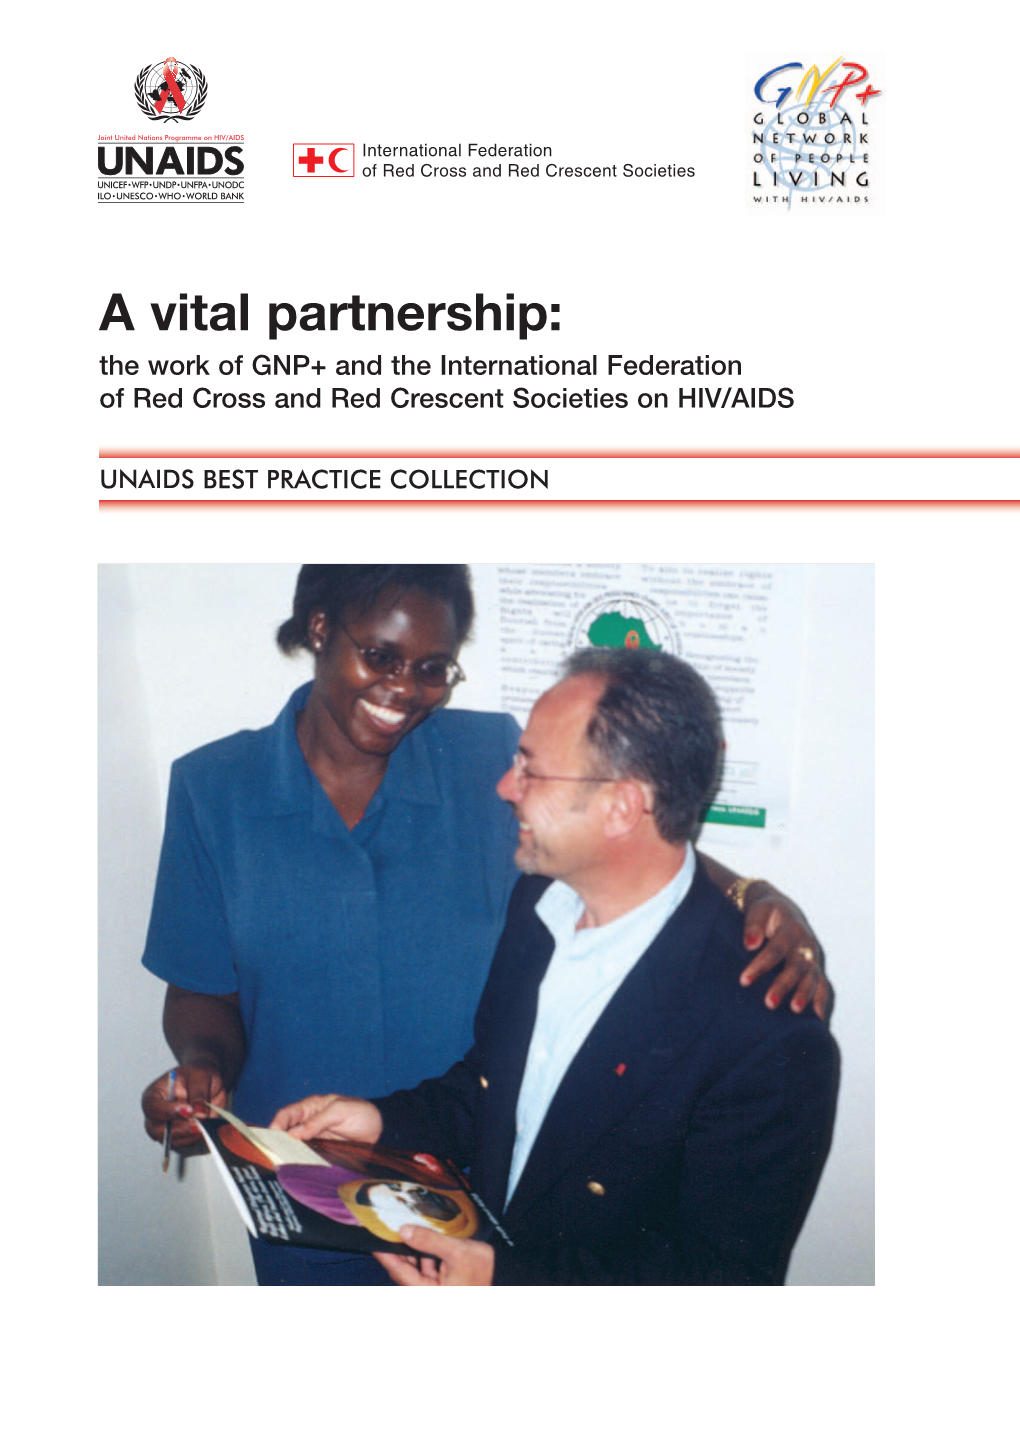 A Vital Partnership: the Work of GNP+ and the International Federation of Red Cross and Red Crescent Societies on HIV/AIDS